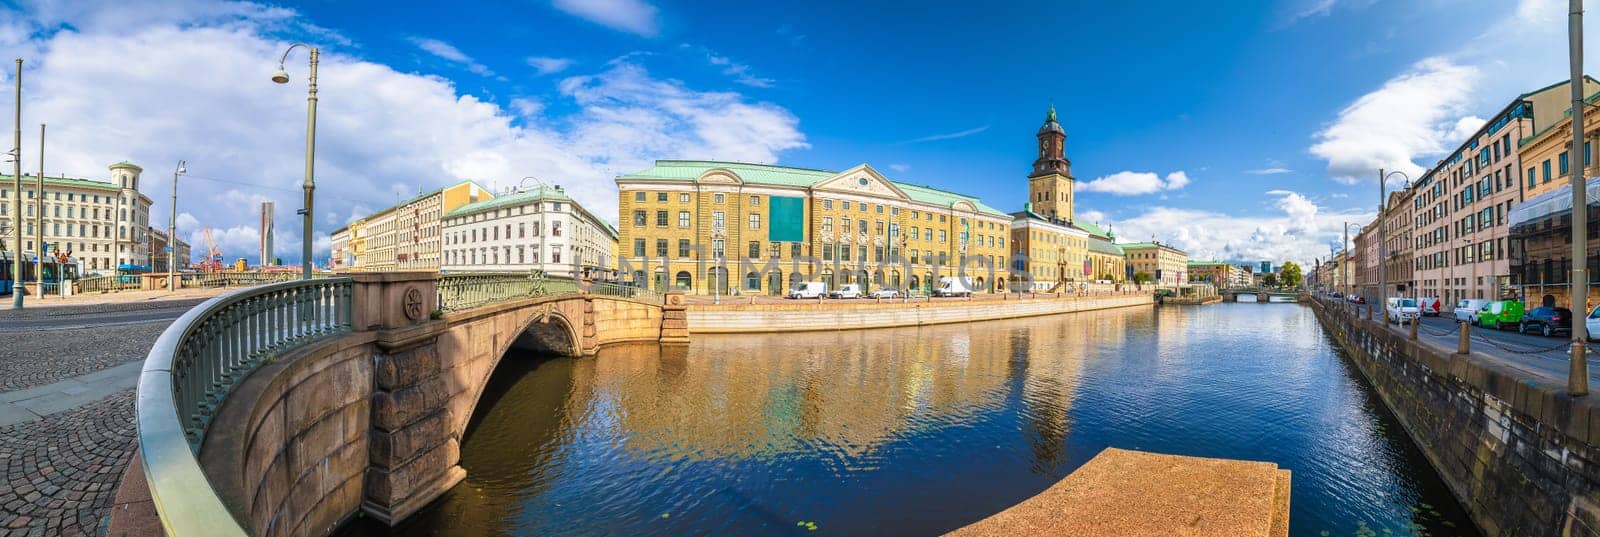 City of Gothenburg channel street architecture panoramic view, Vastra Gotaland County of Sweden